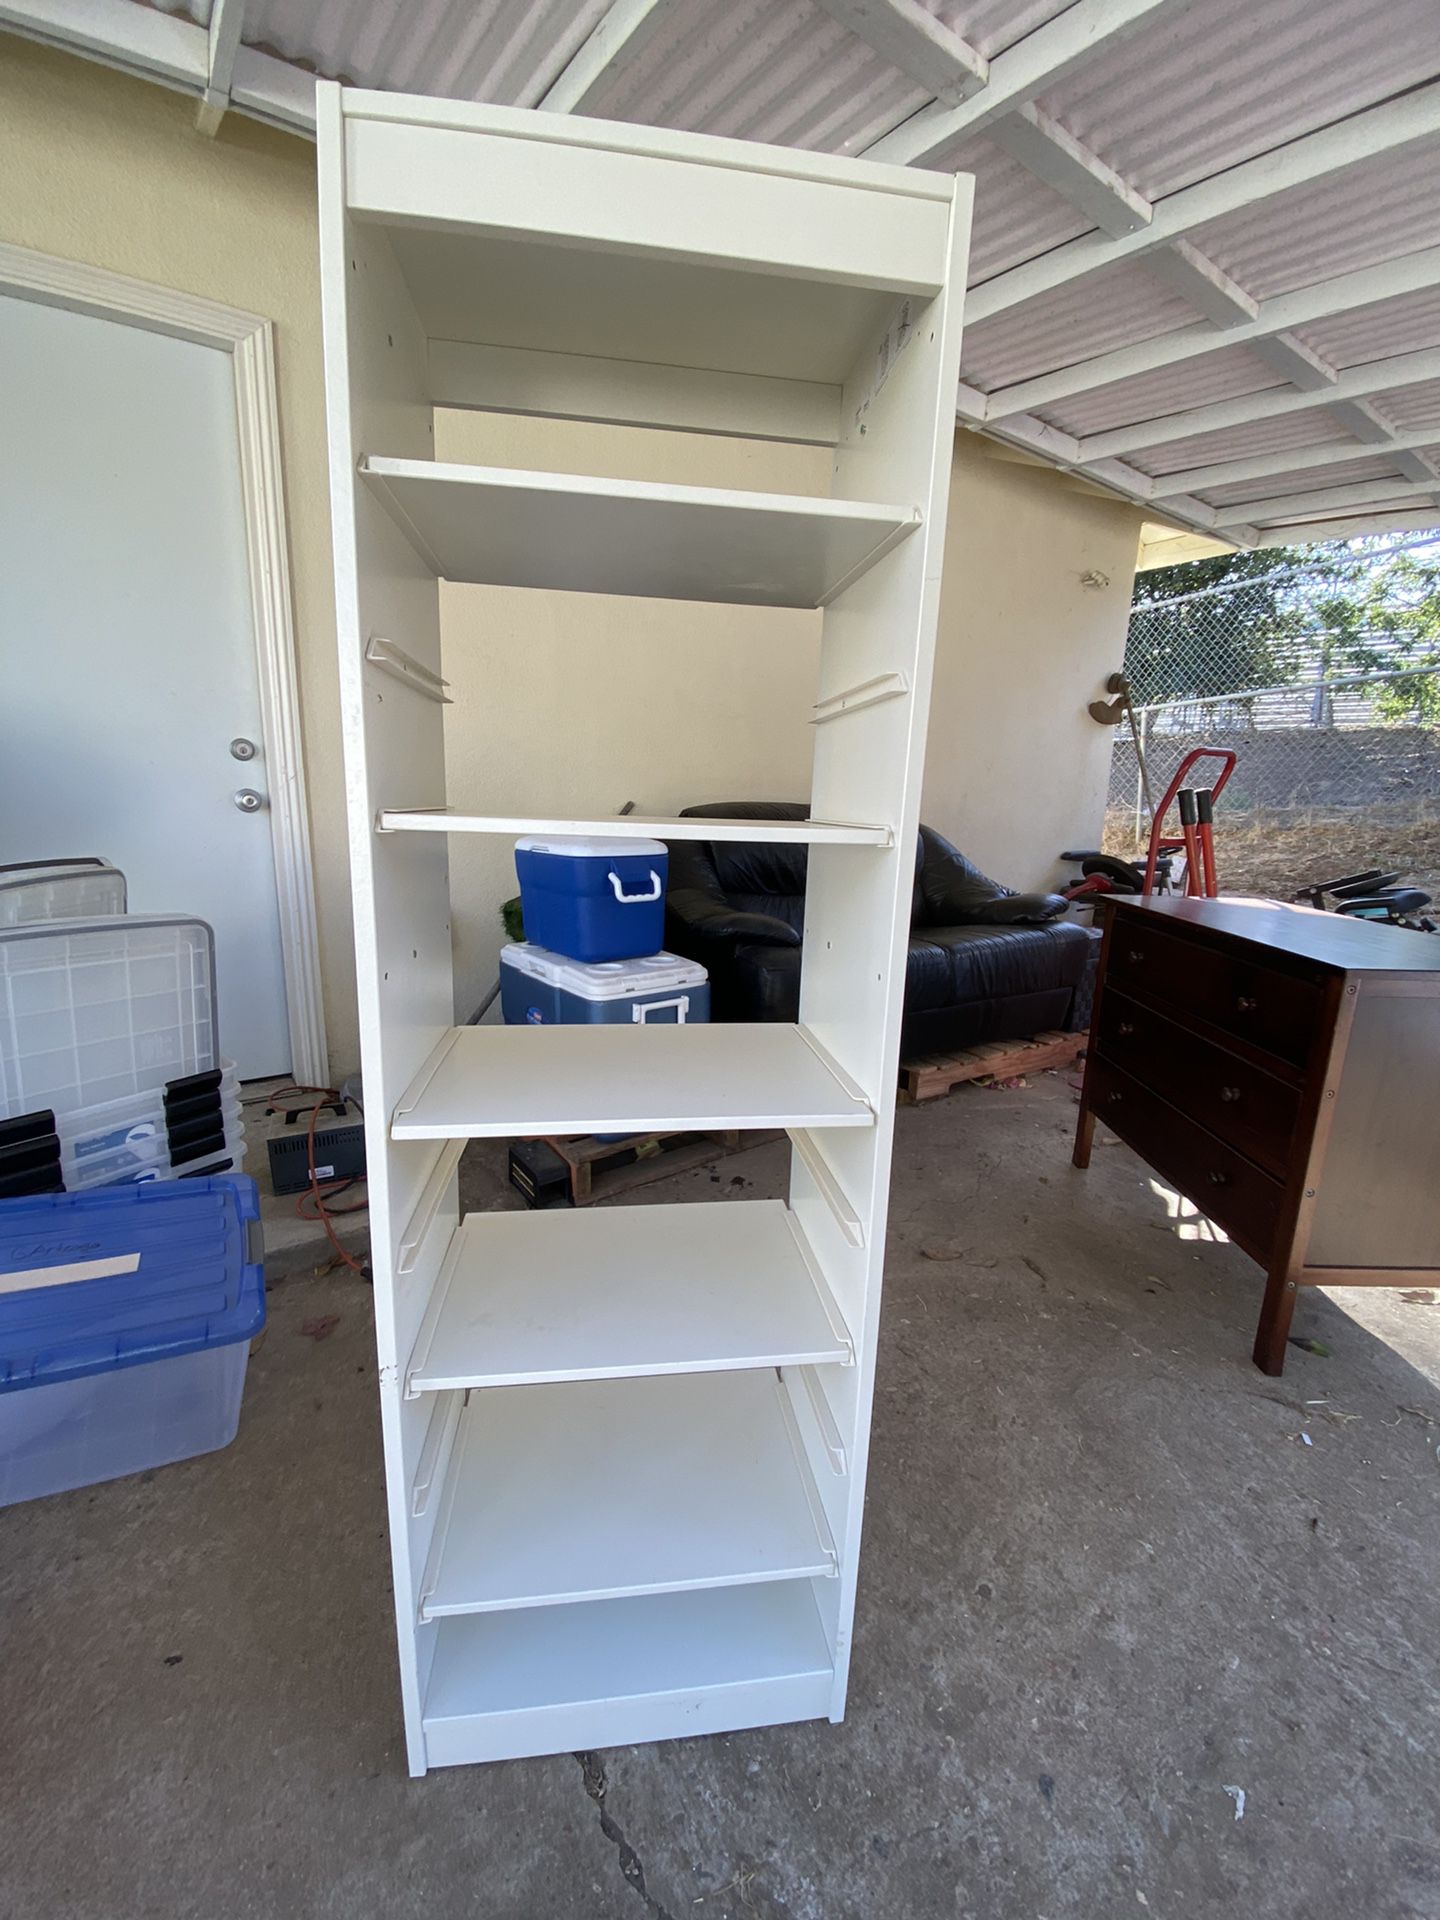 Shelving Unit For Small Space